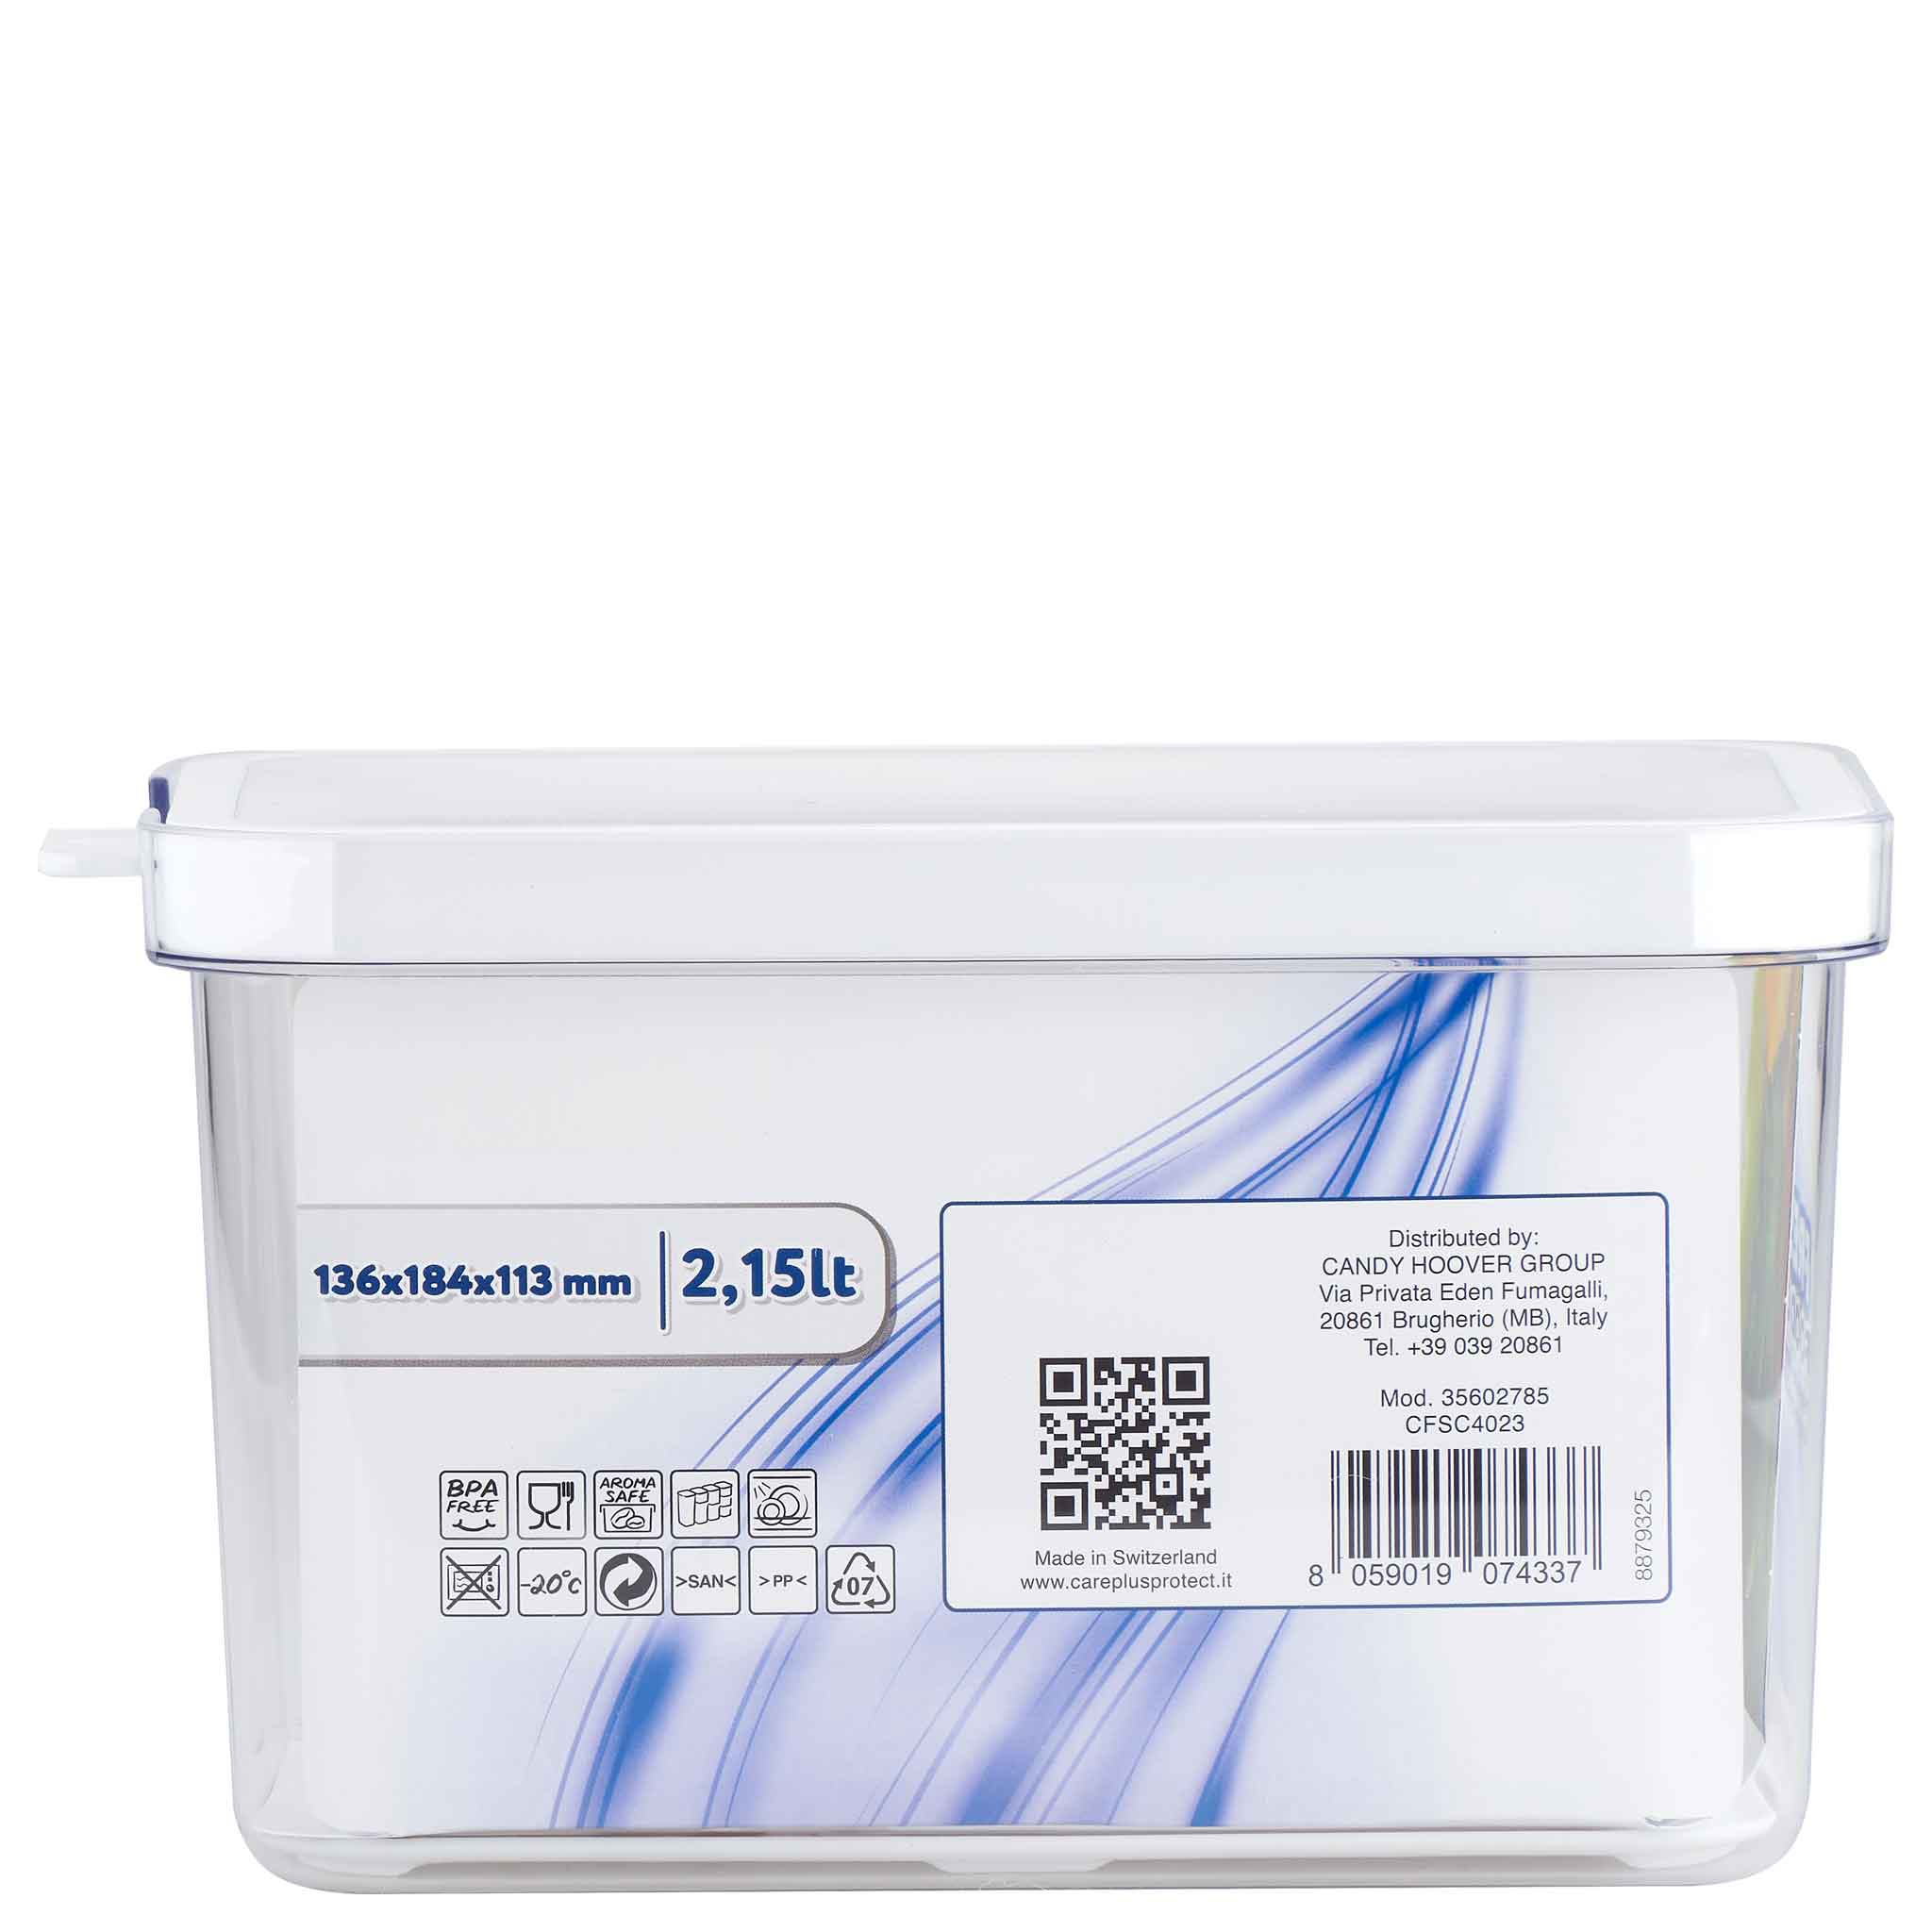 Freshness Food Container, 2.15l